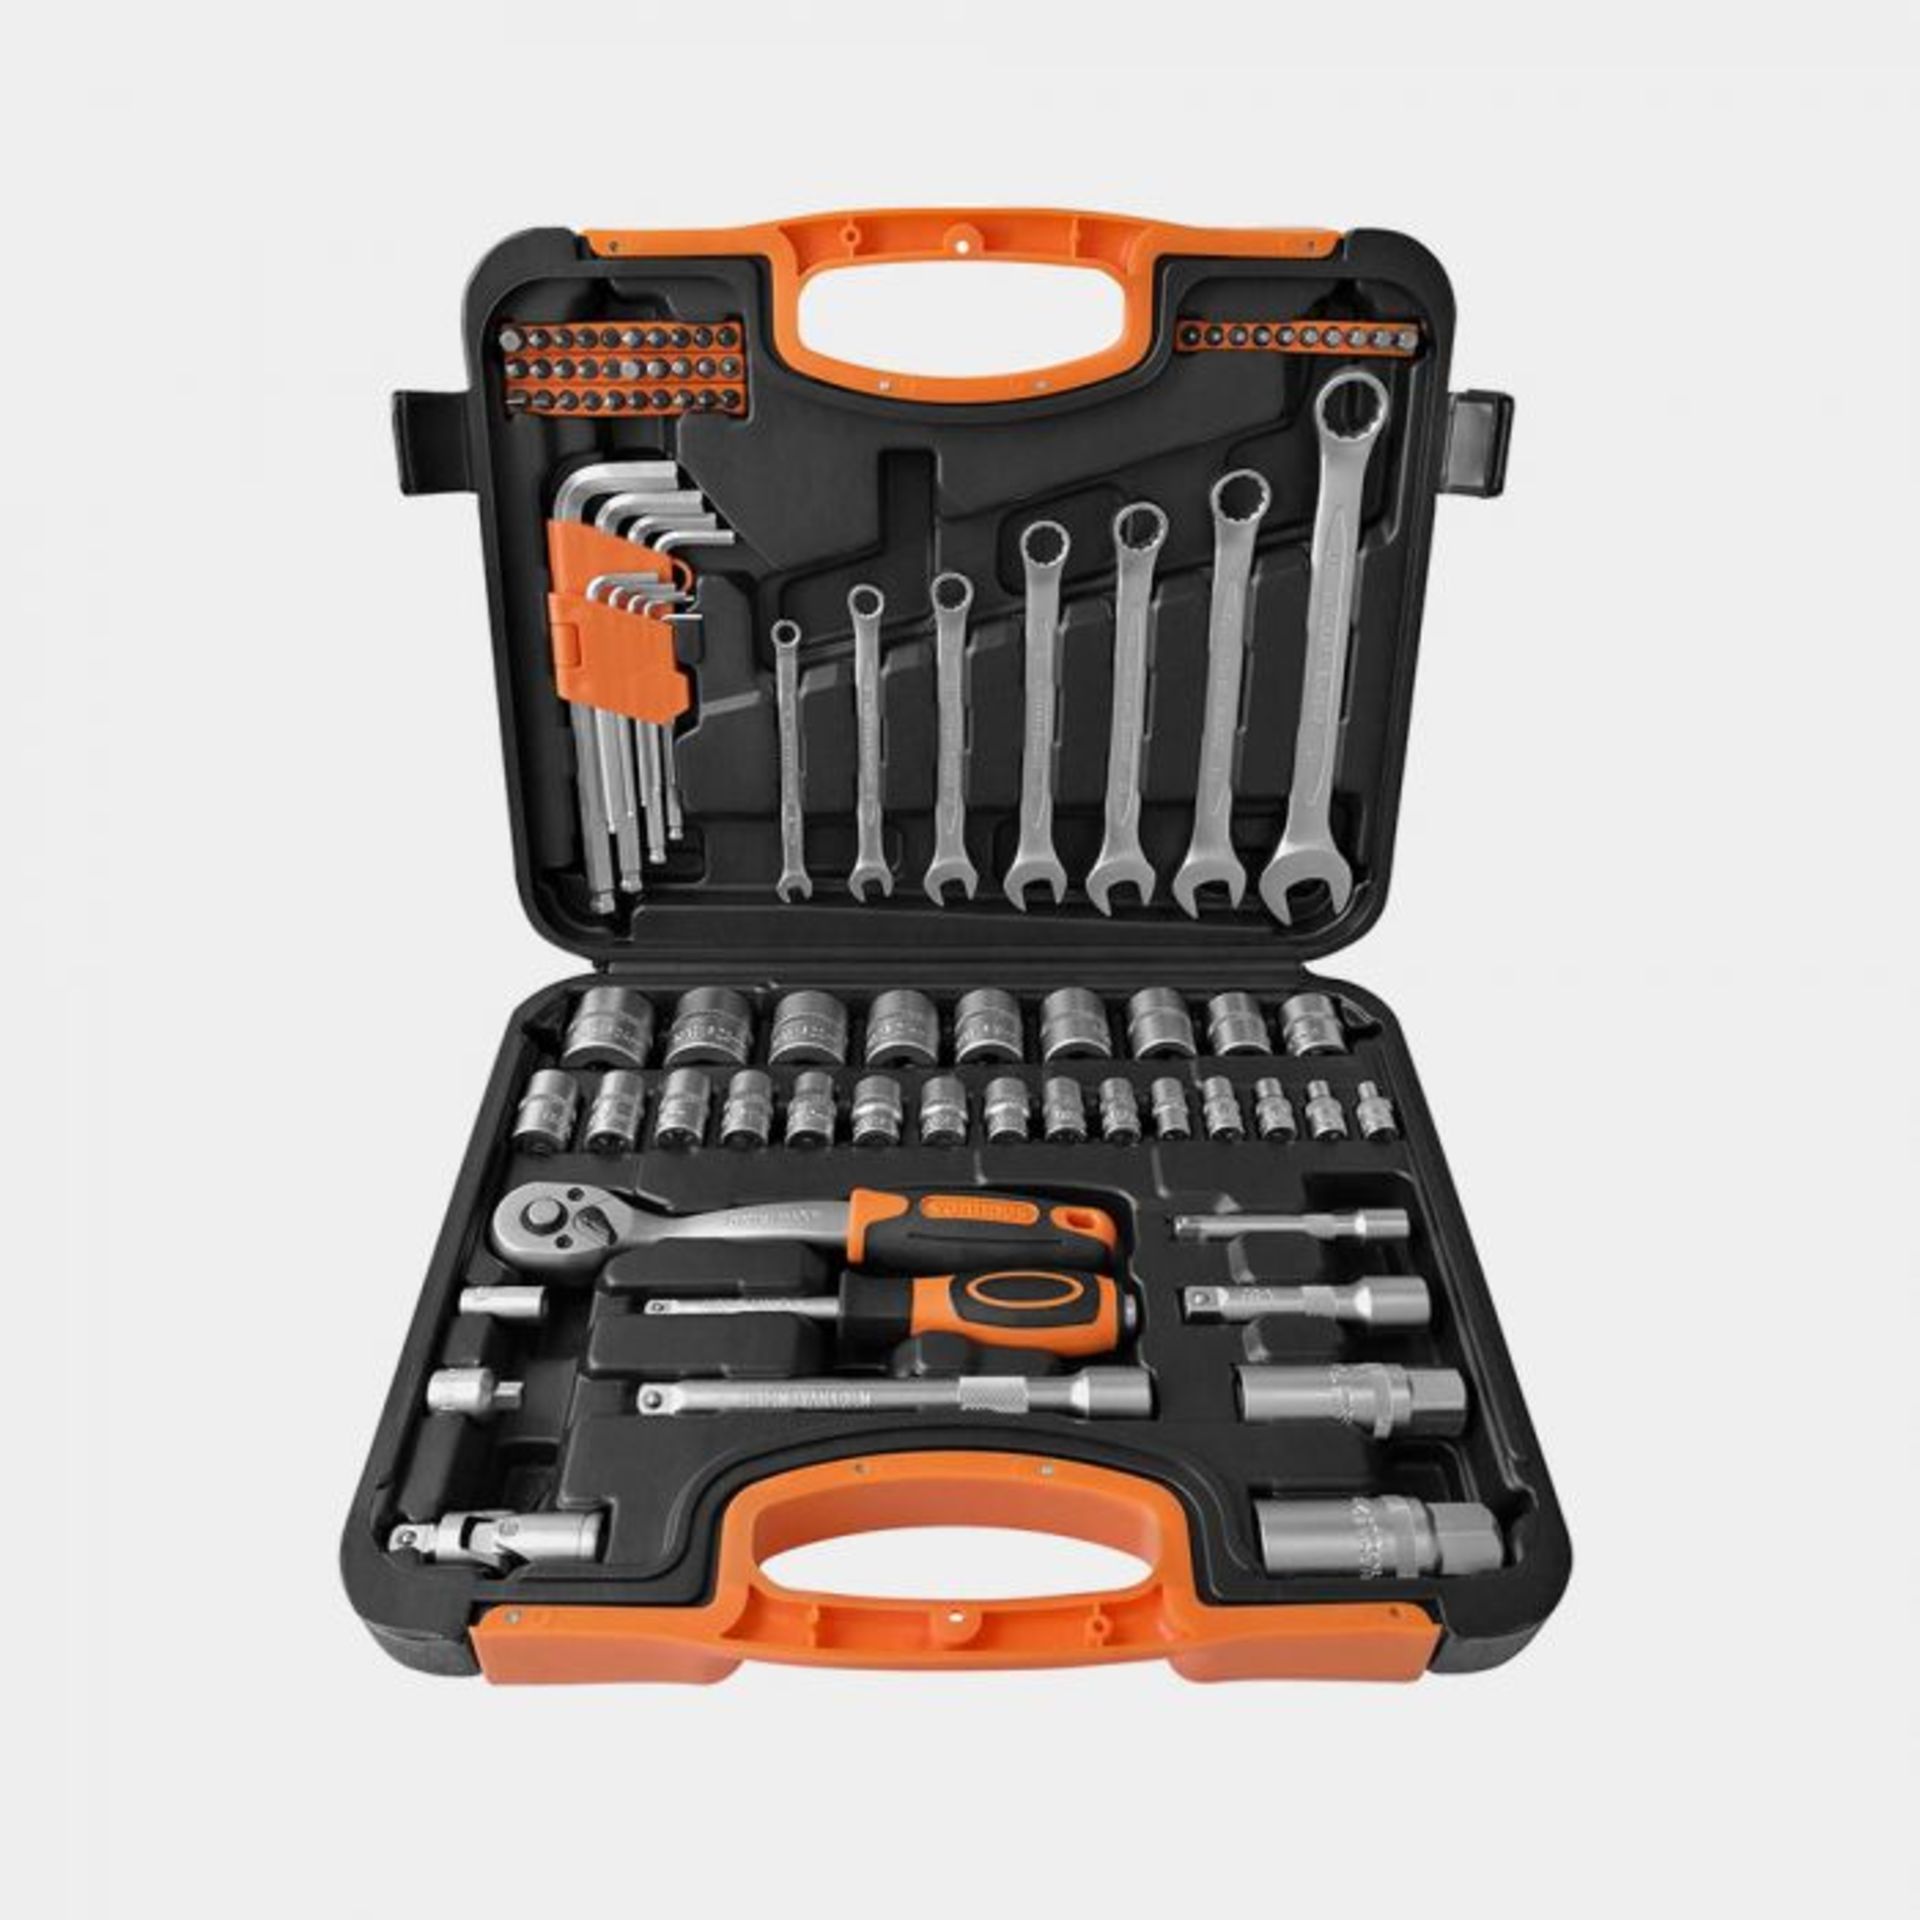 2 X BRAND NEW 90pc Socket Set, Our comprehensive 90pc Socket Set is ideal for a DIY enthusiast or